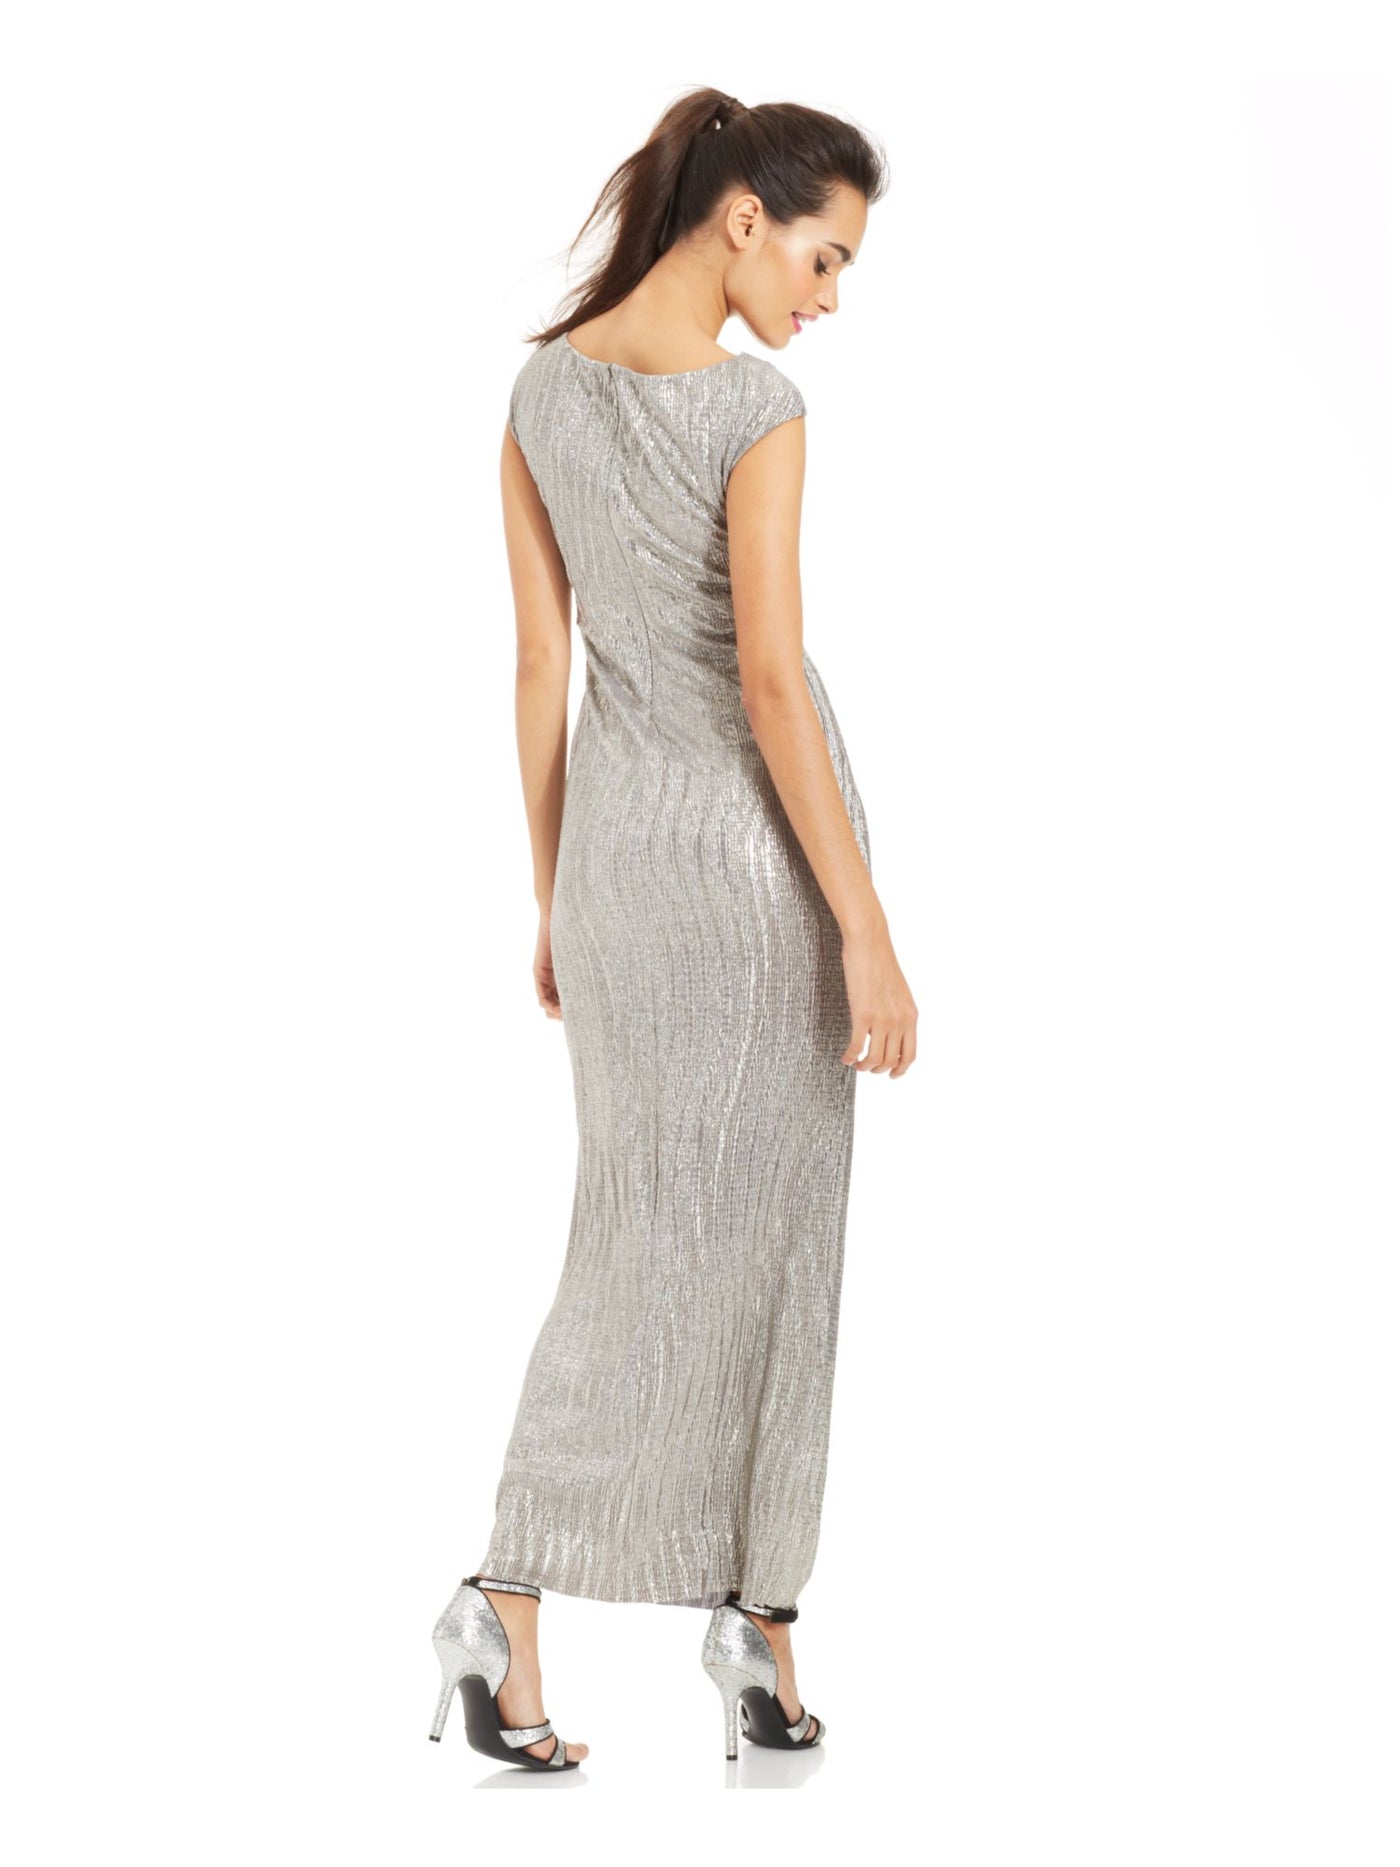 CONNECTED APPAREL Womens Silver Textured Slitted Metallic Gown Sleeveless Cowl Neck Maxi Evening Sheath Dress Petites 6P